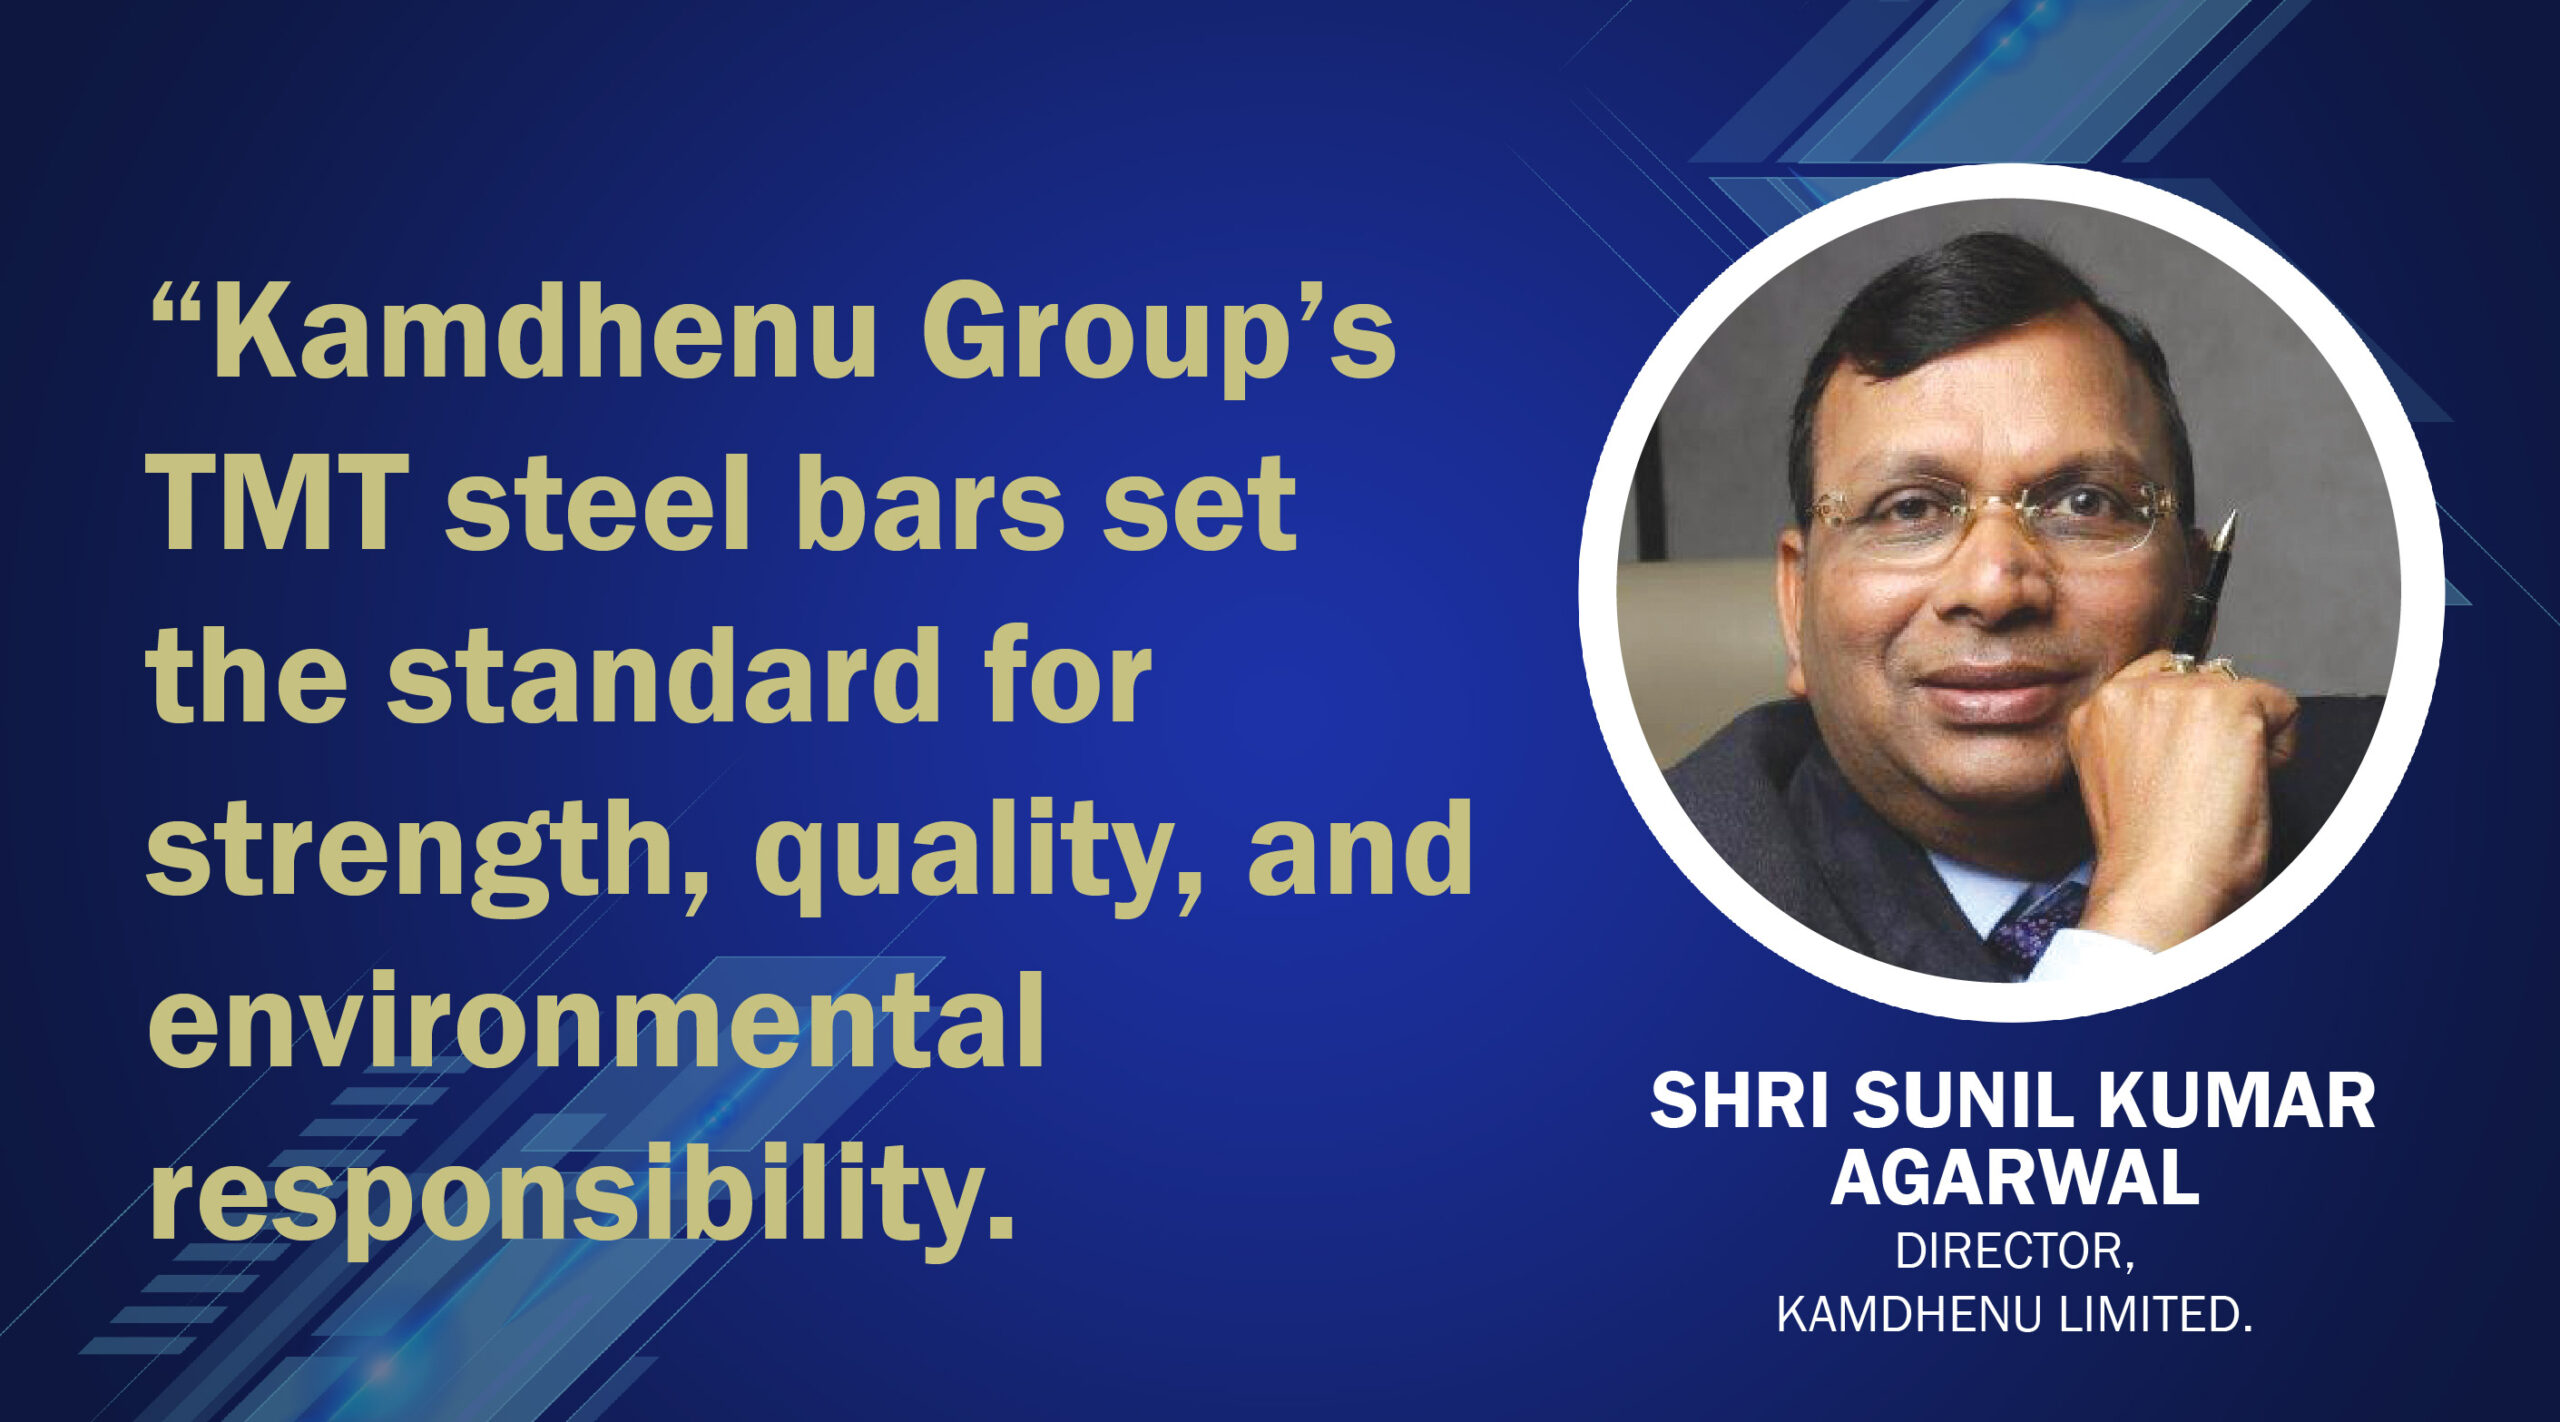 We offer unmatched strength, superior quality, and environmentally sustainable TMT steel bars